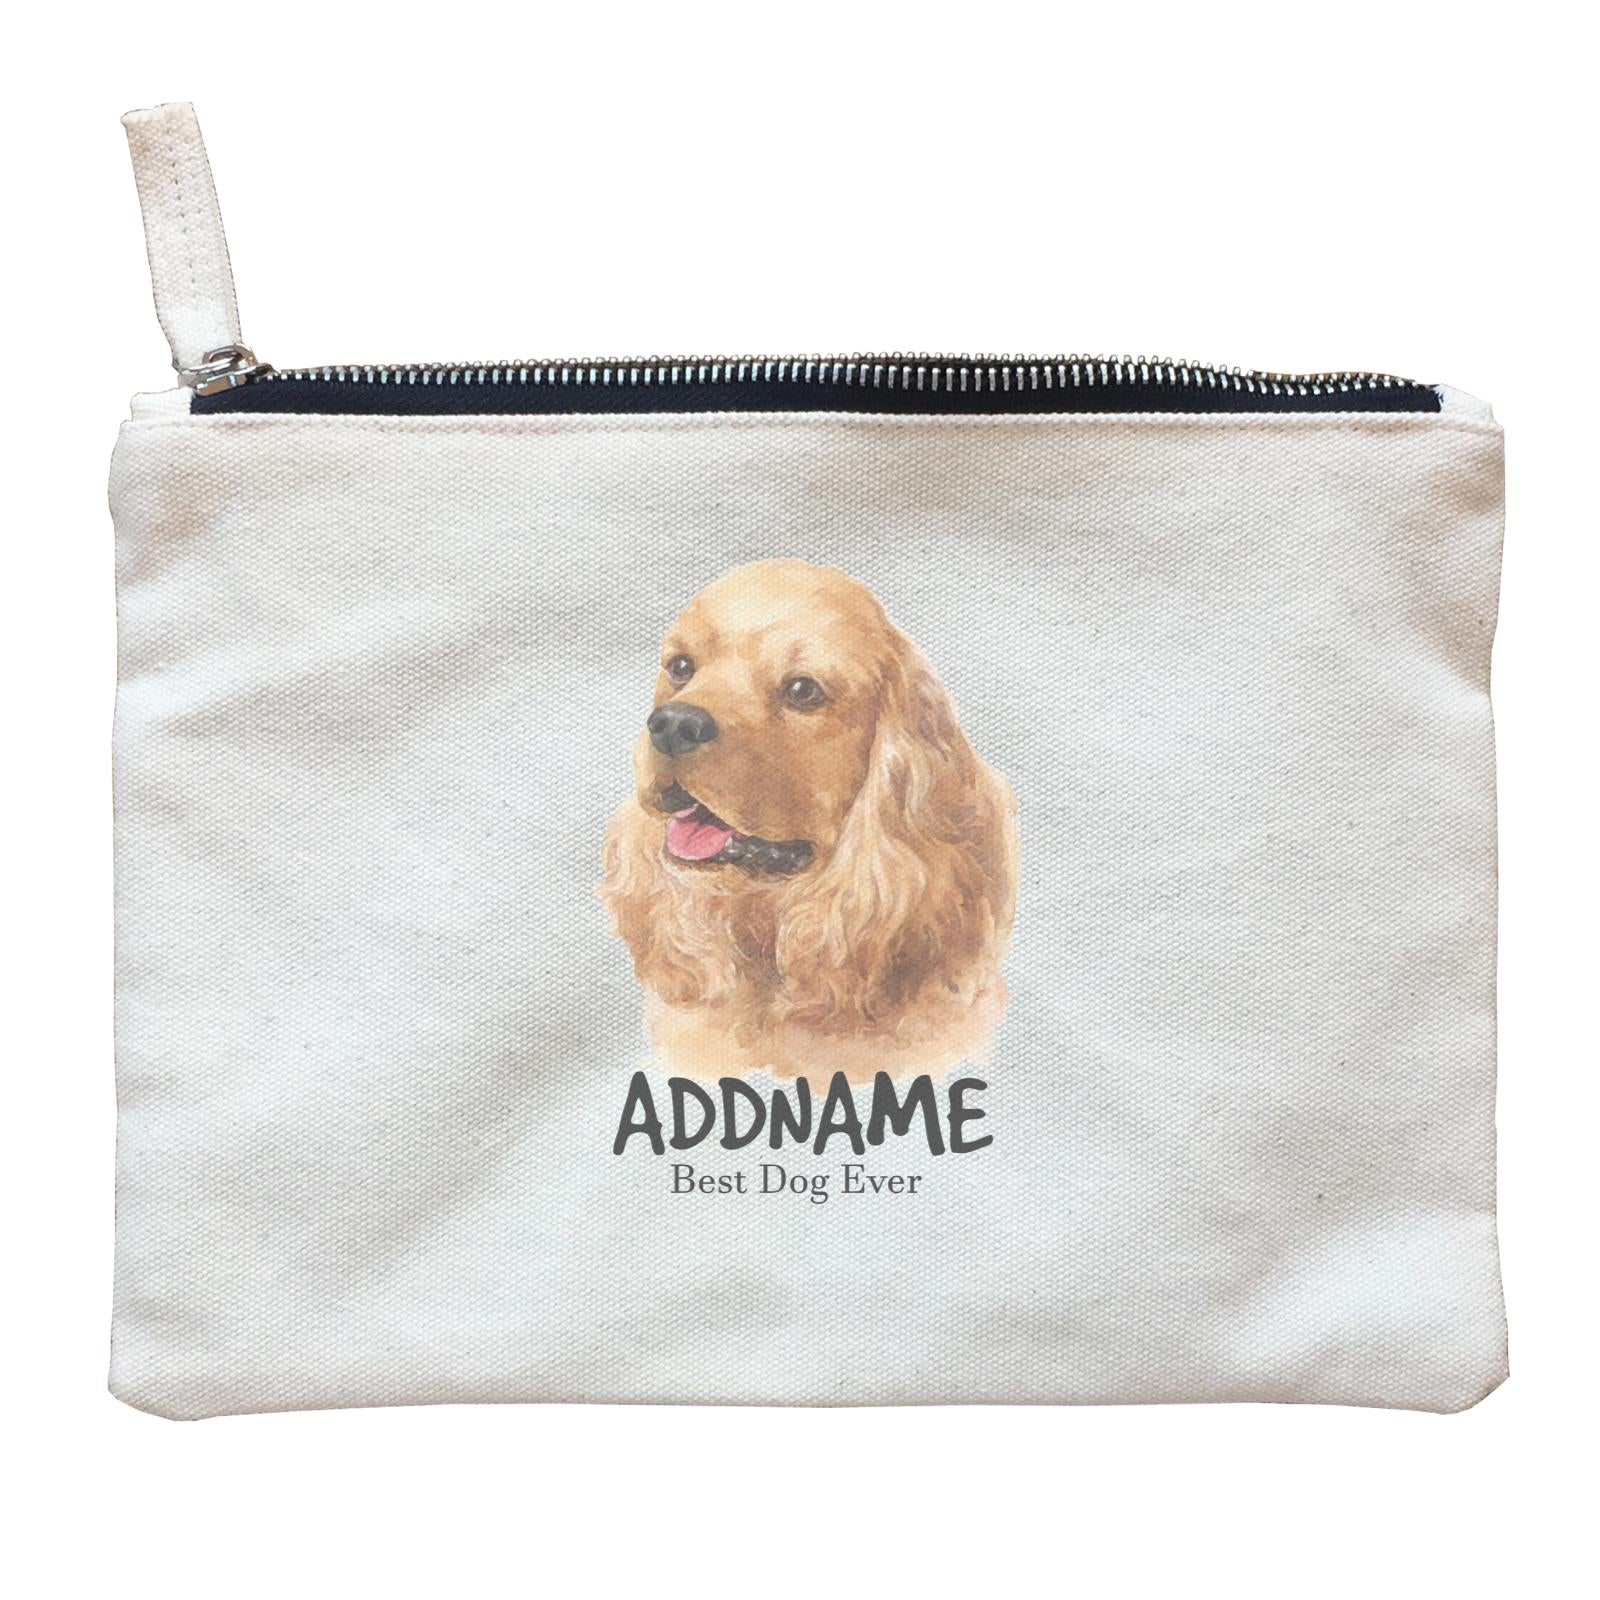 Watercolor Dog Cocker Spaniel Best Dog Ever Addname Zipper Pouch